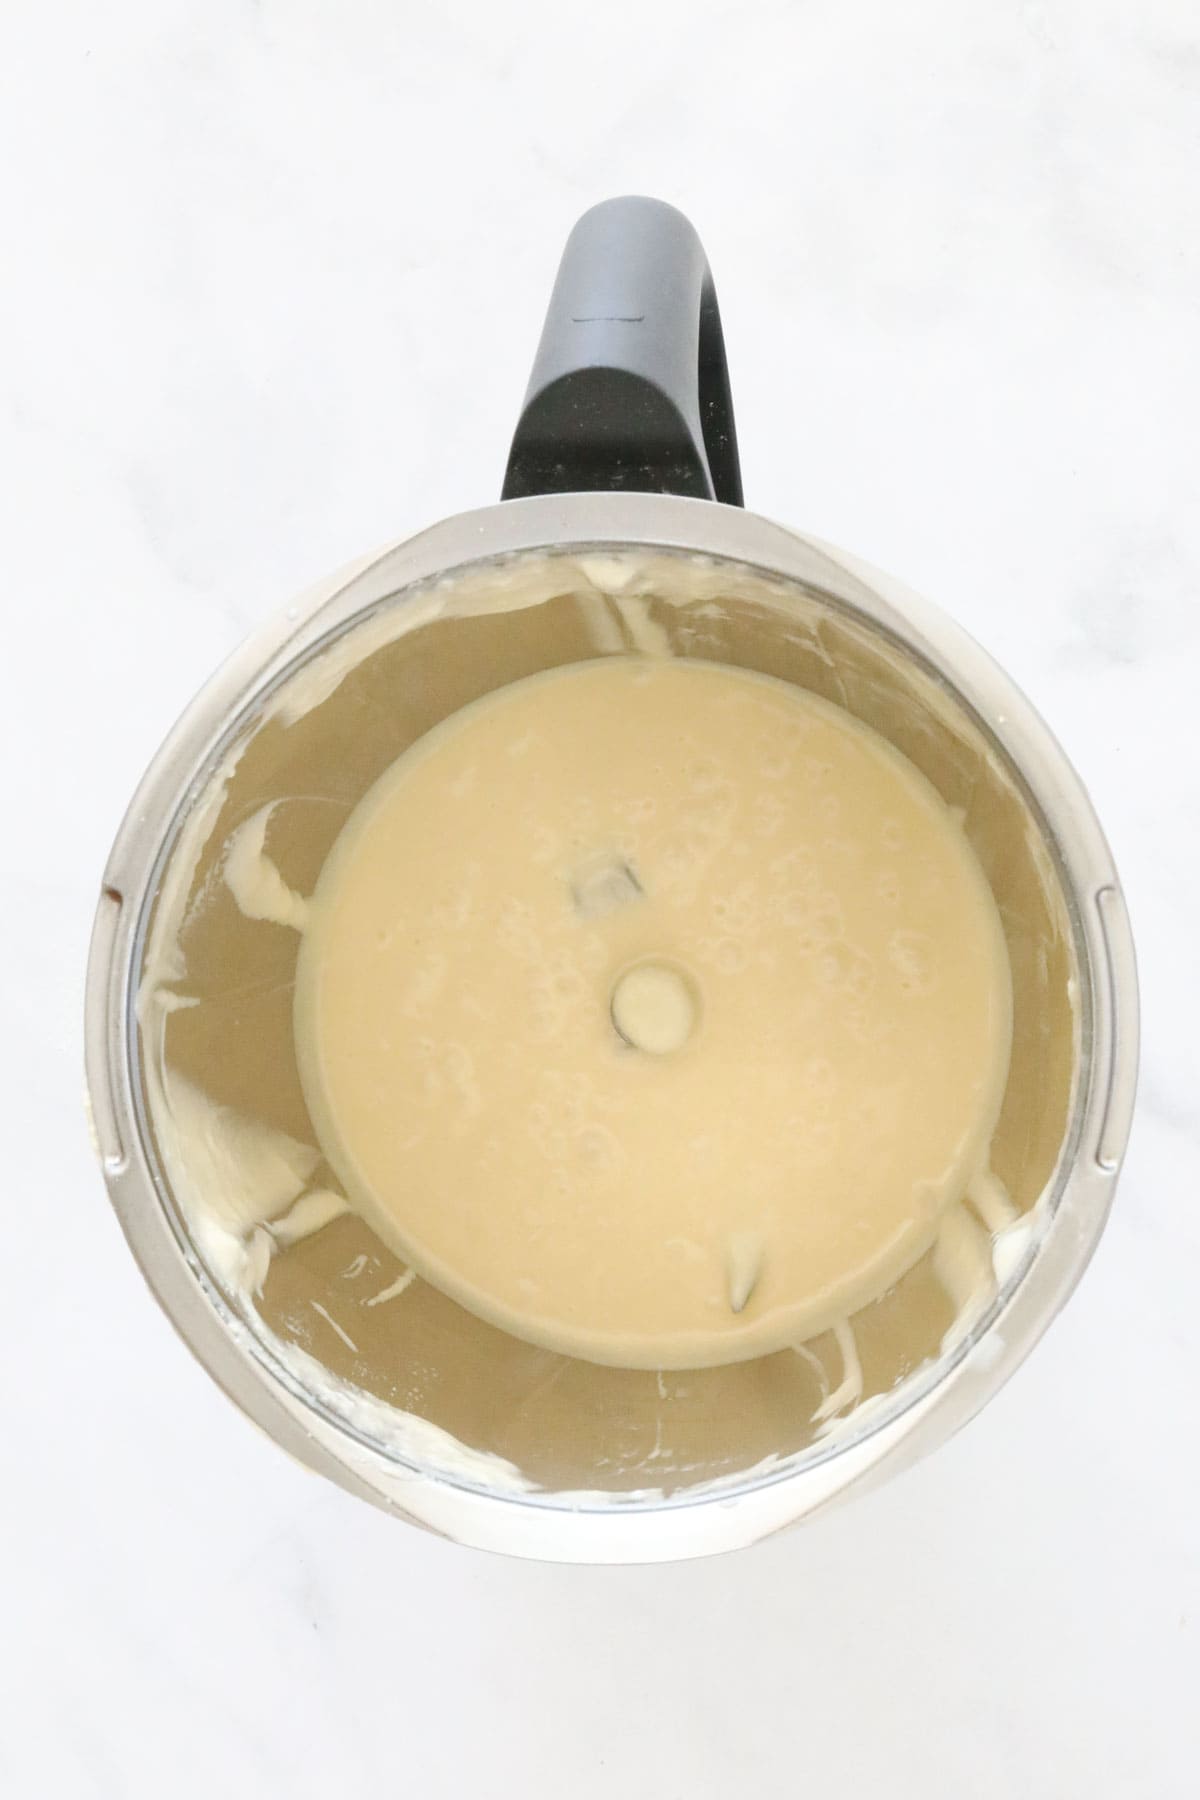 Cake batter in a Thermomix.